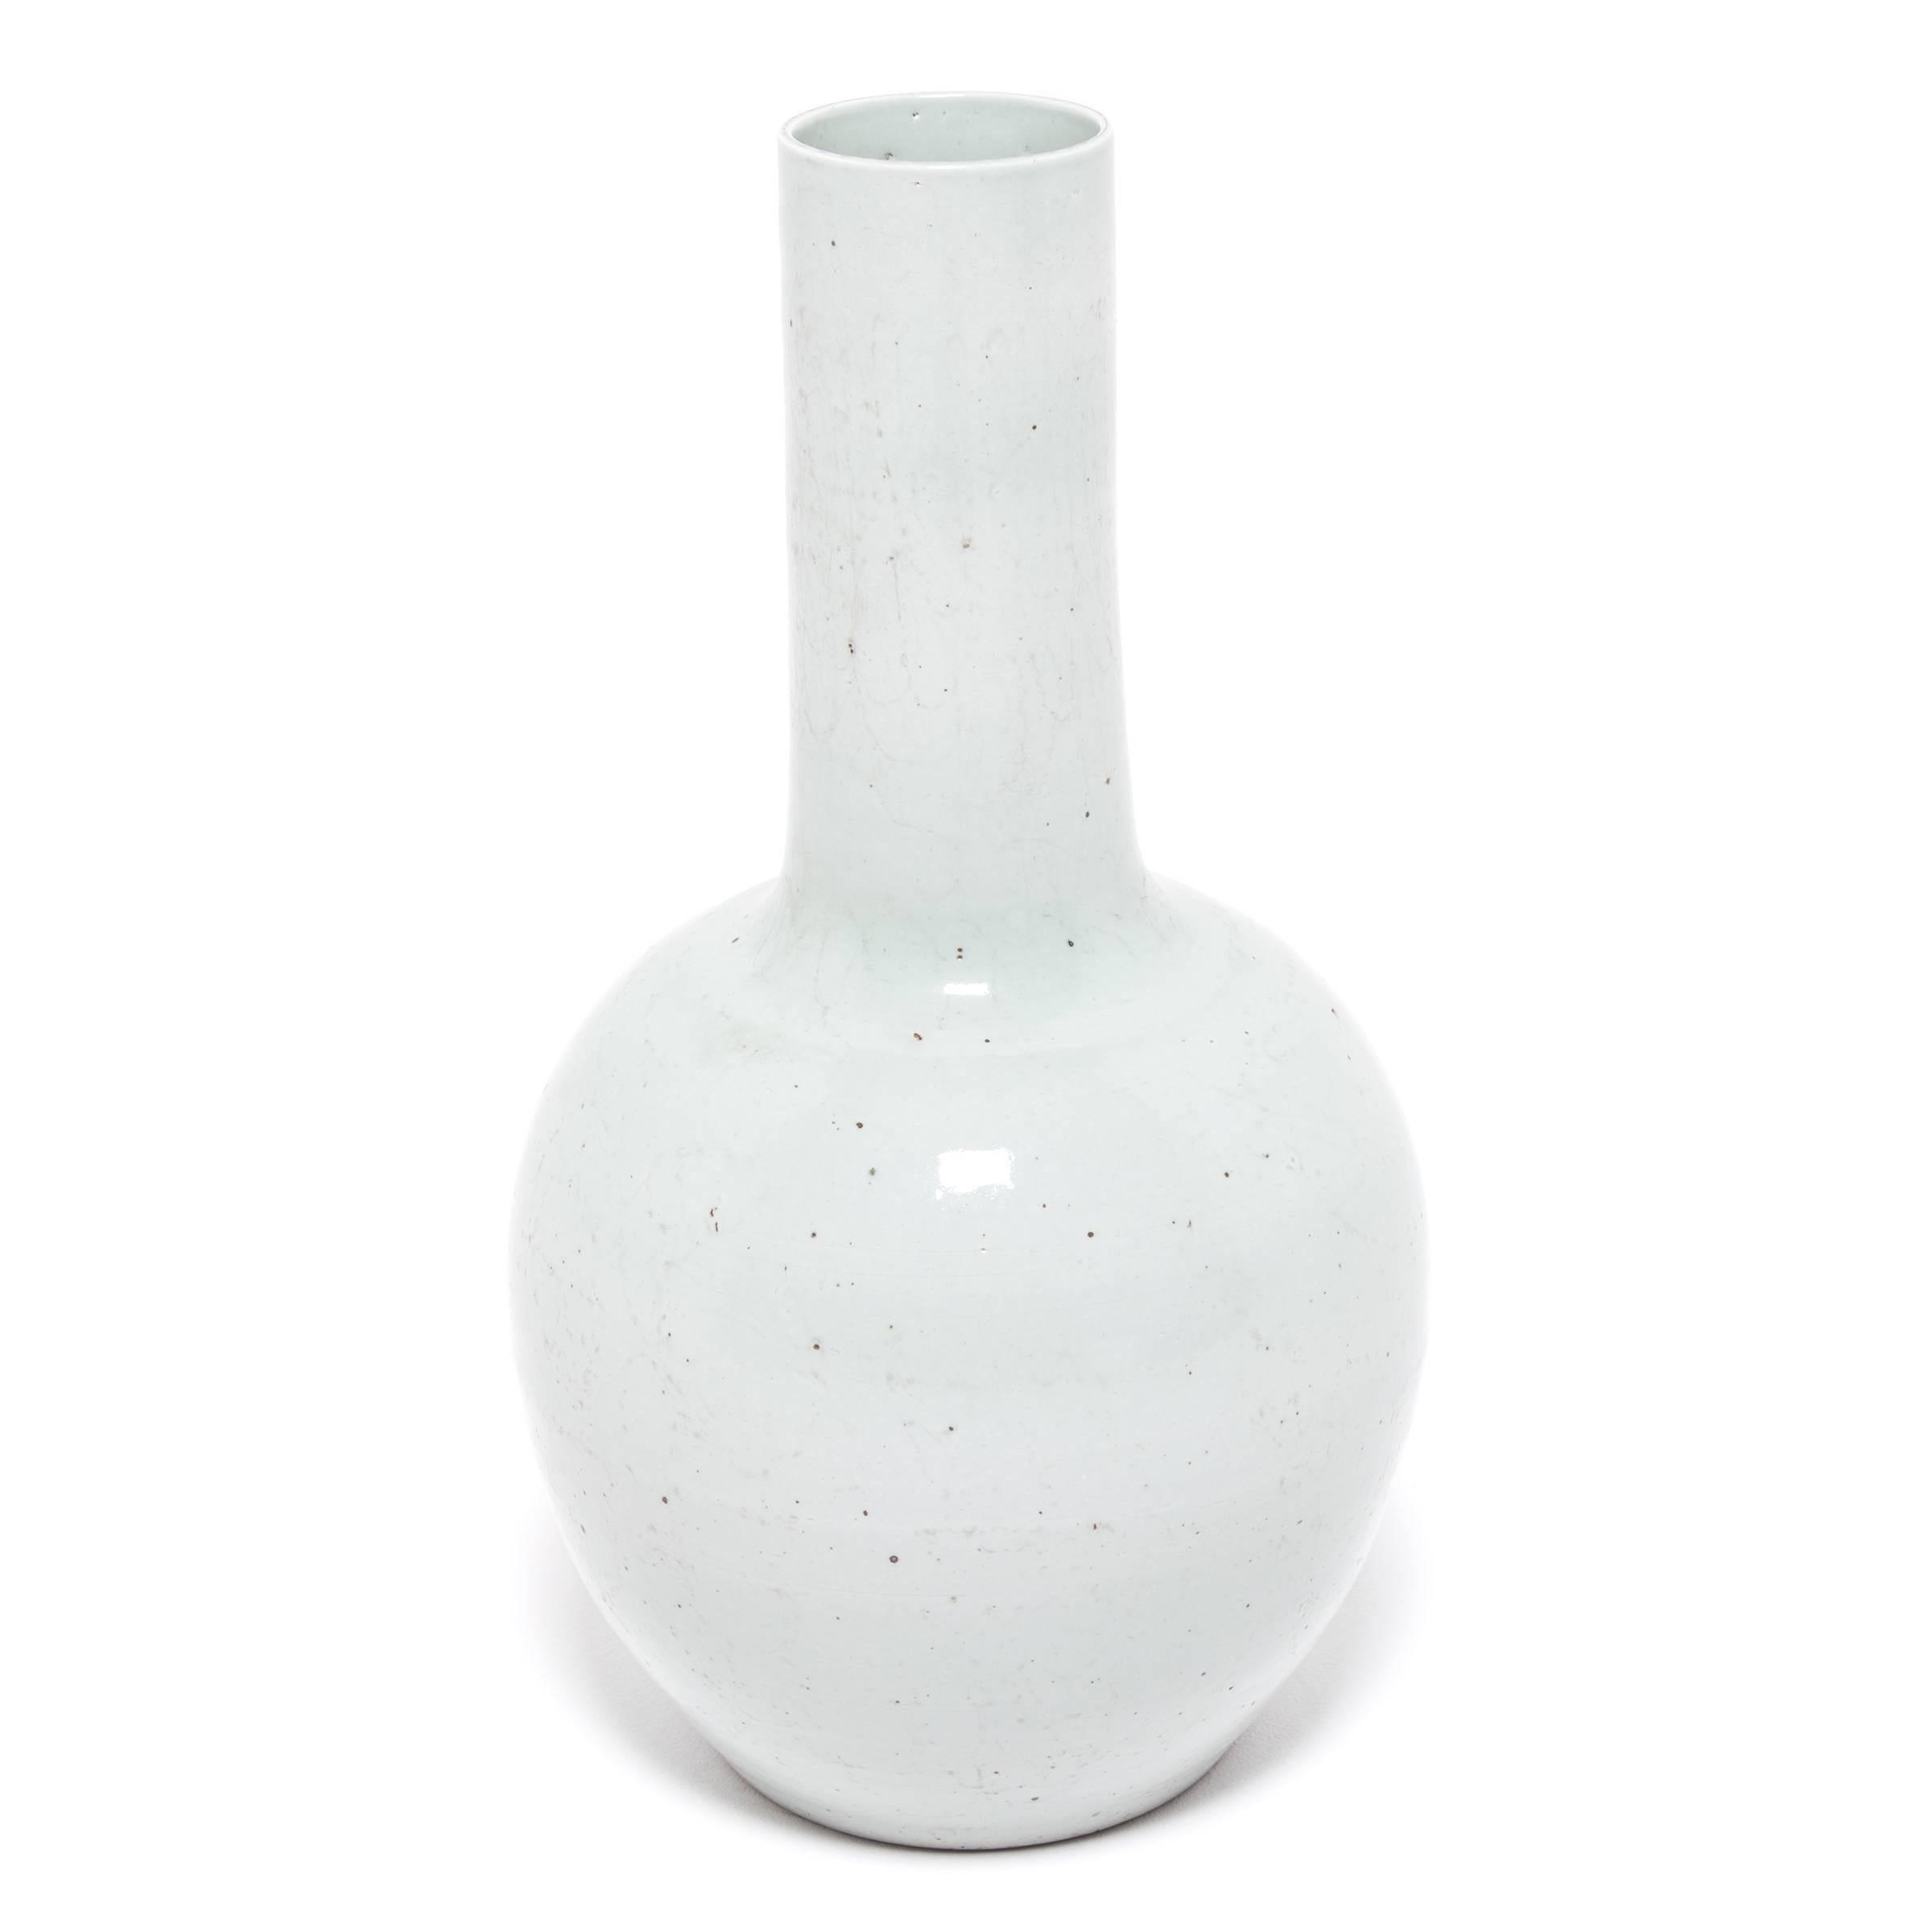 Drawing on a long Chinese tradition of monochrome ceramics, this tall gooseneck vase is glazed in serene pale celadon. The vase features a rounded, globular body and a narrow cylindrical neck, a classic form known as 'tianqiuping' or 'celestial ball